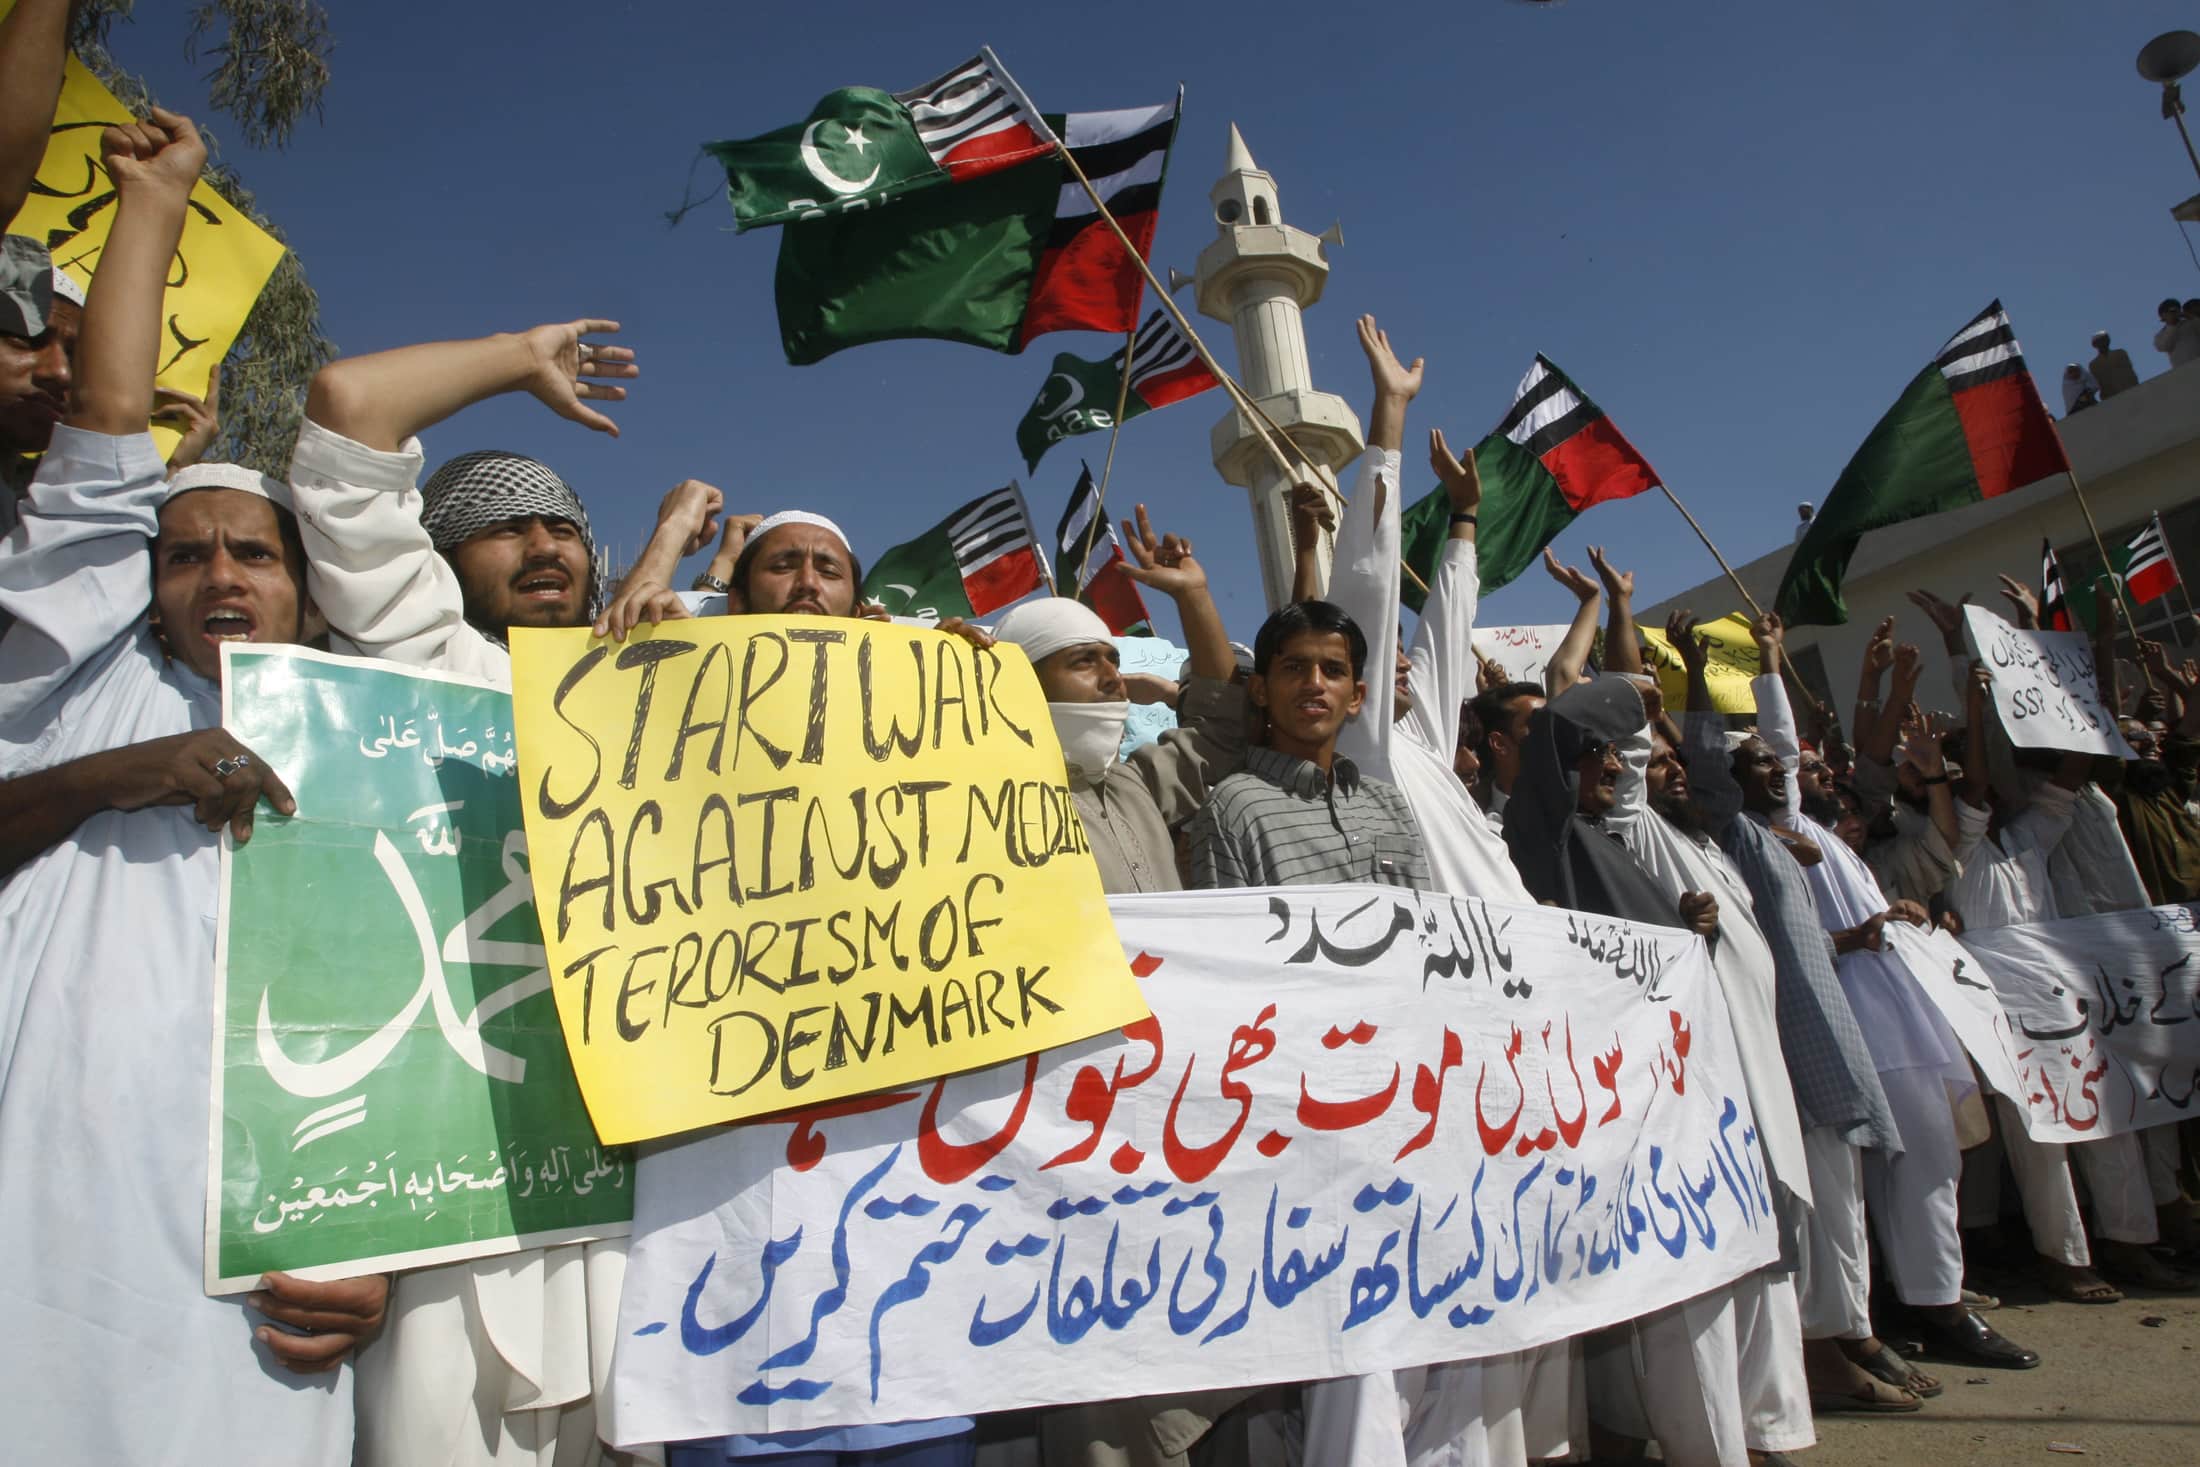 Activists of the Sunni Action Committee chant slogans to protest against the republication of cartoons depicting the Prophet Mohammad, in Karachi, 29 February 2008. , REUTERS/Athar Hussain